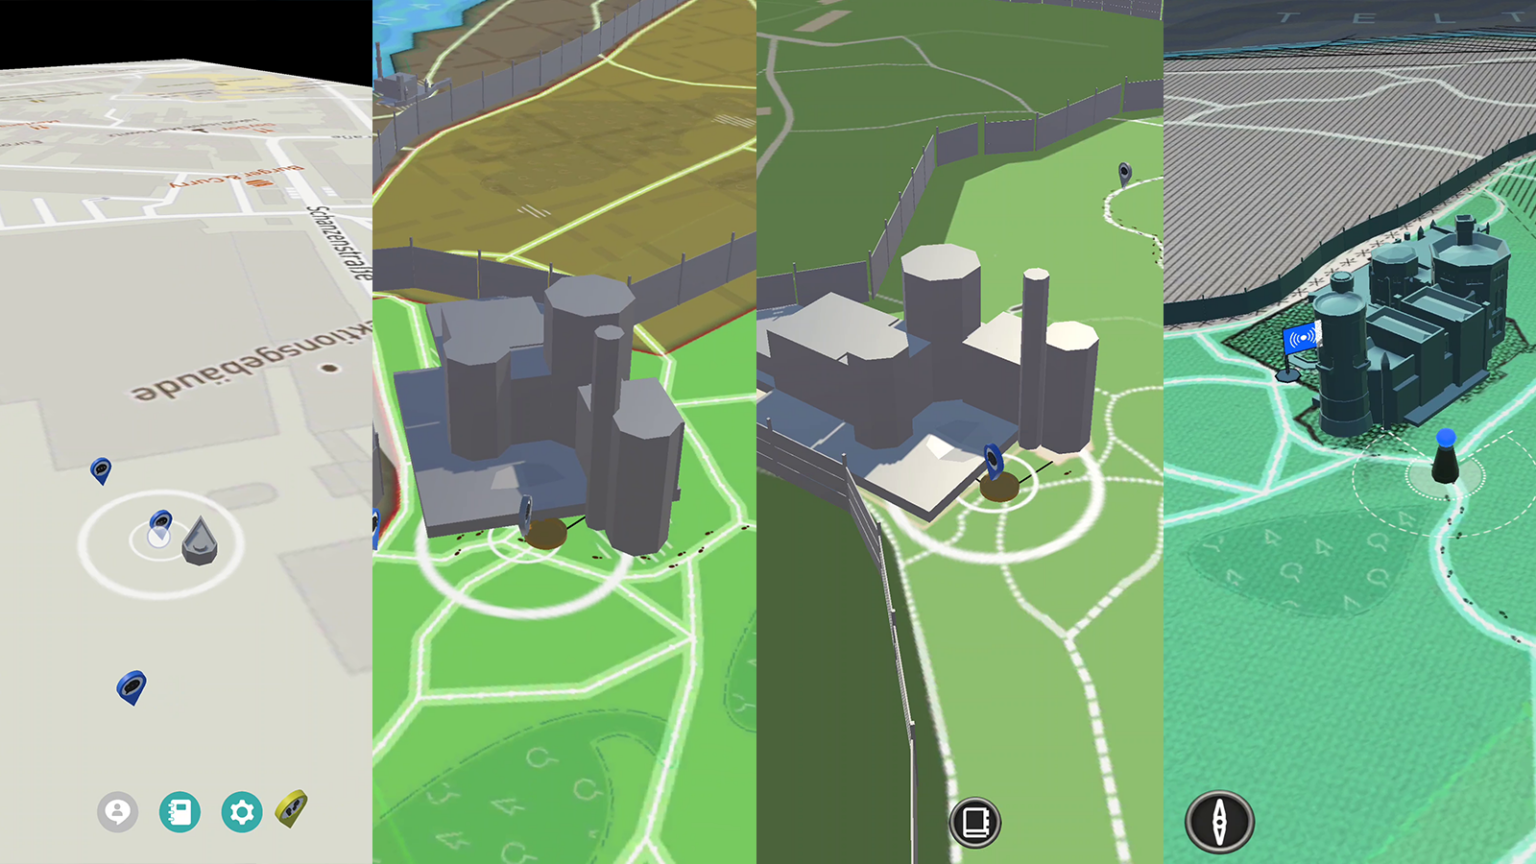 The map view of the game in four different stages of development to show visual improvement